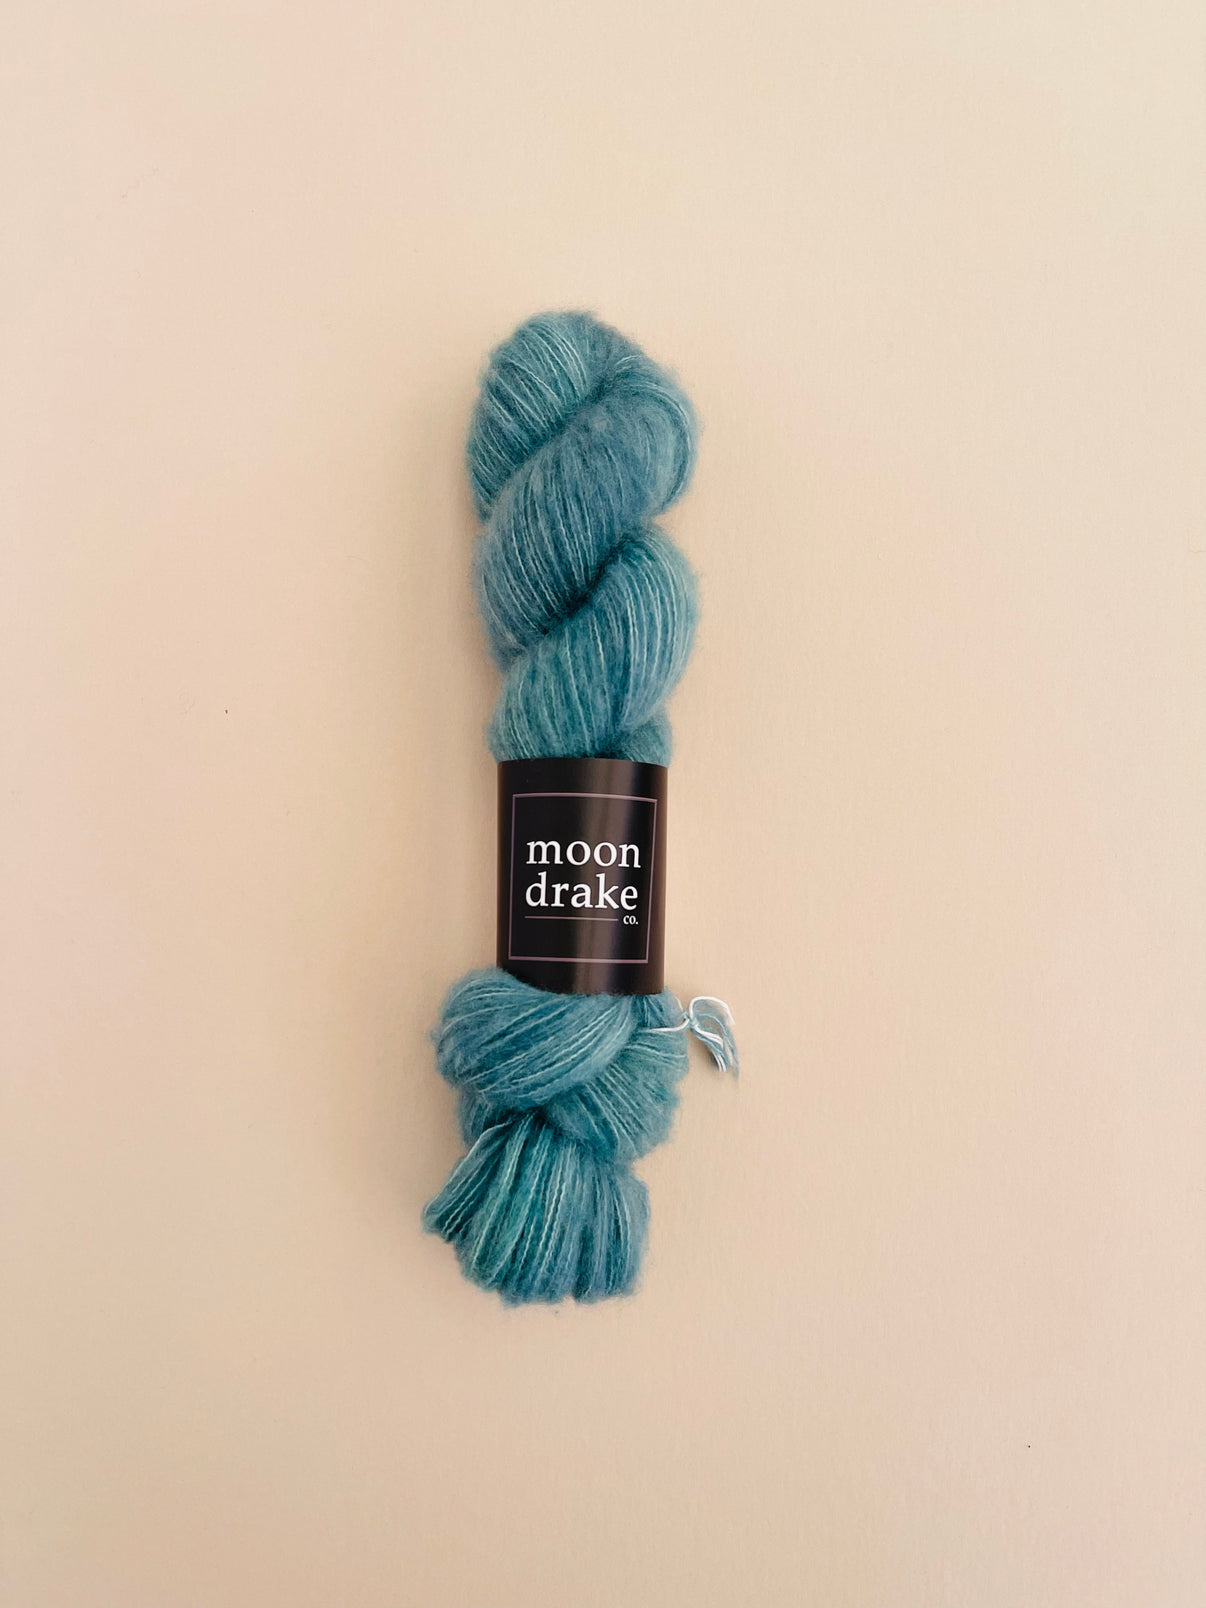 A teal skein of yarn that looks very soft to the touch.